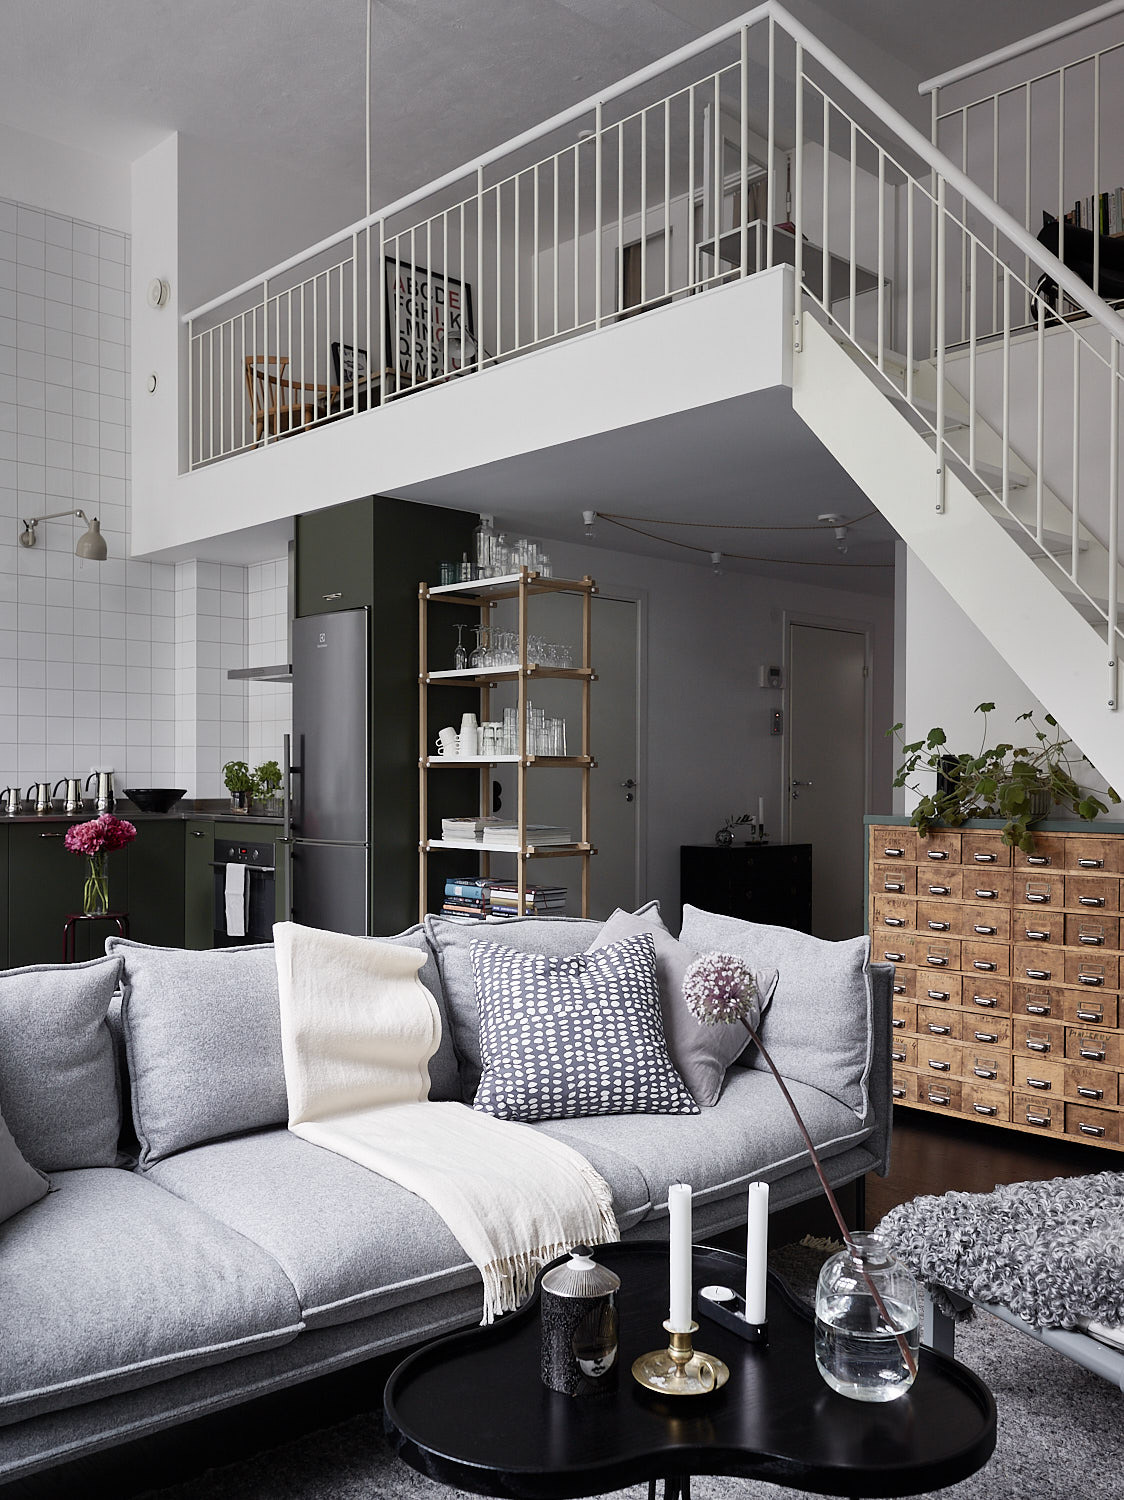 An old piano factory turned into a dreamy Scandinavian loft